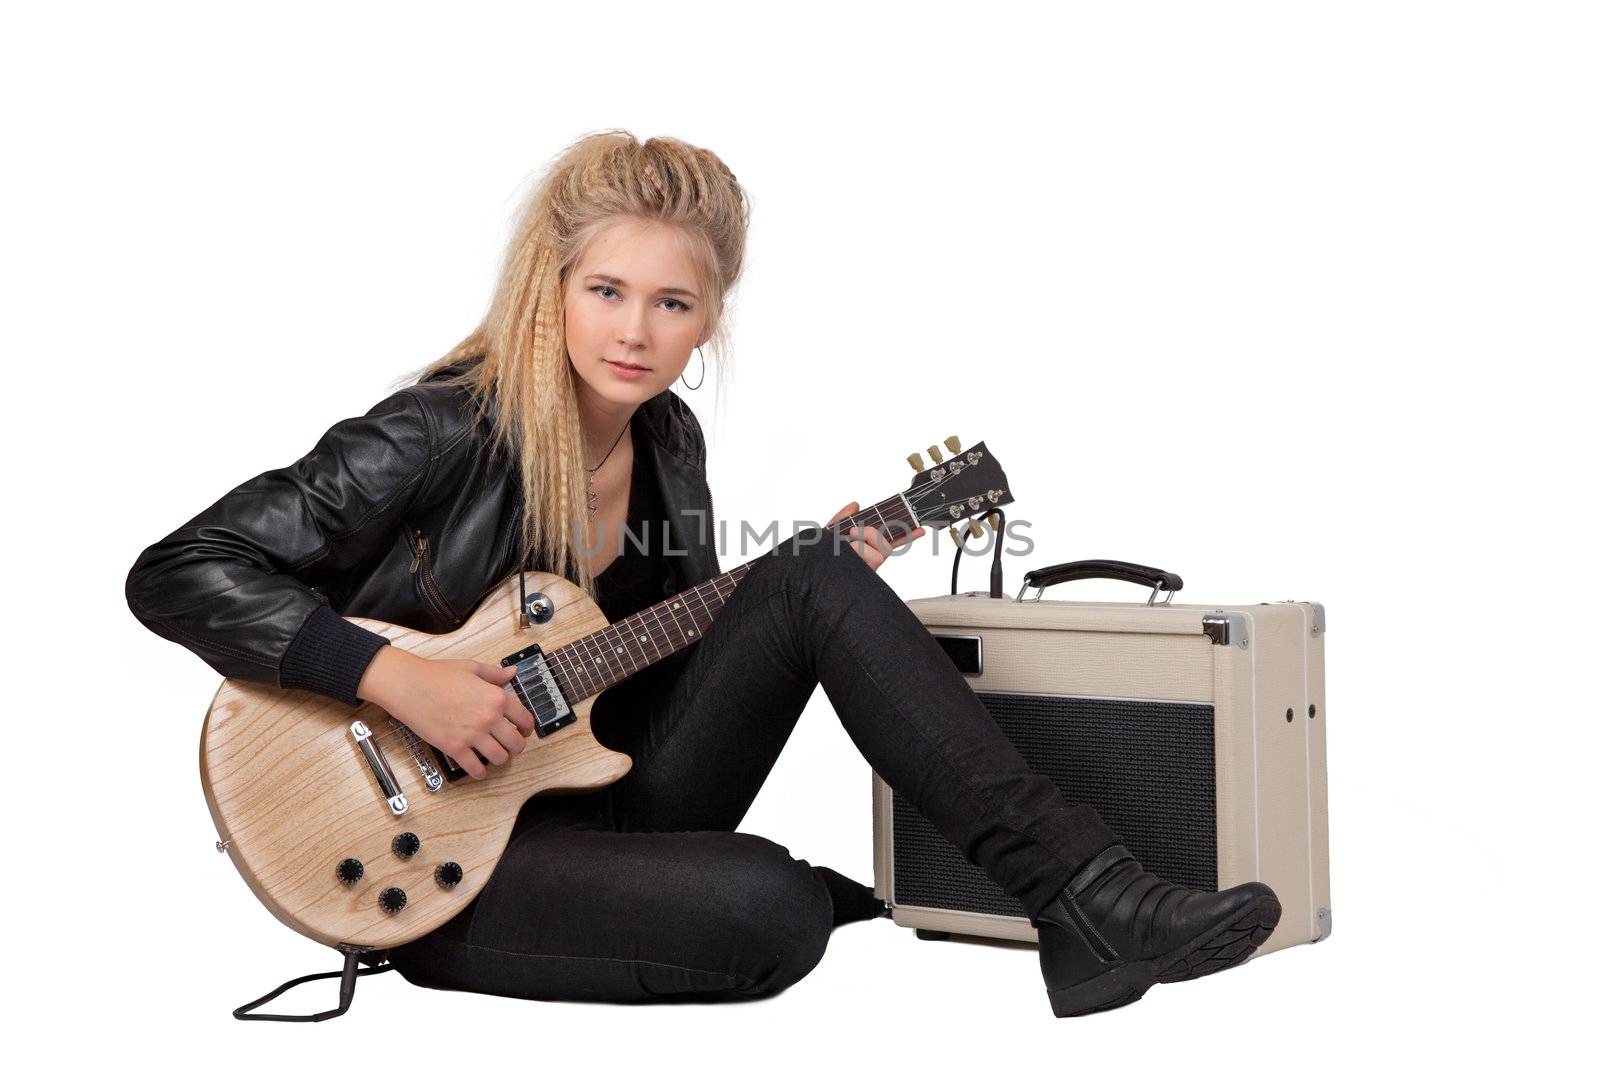 Blond rock teenage girl playing an electric guitar on her knees. Studio shot, isolated on white background.